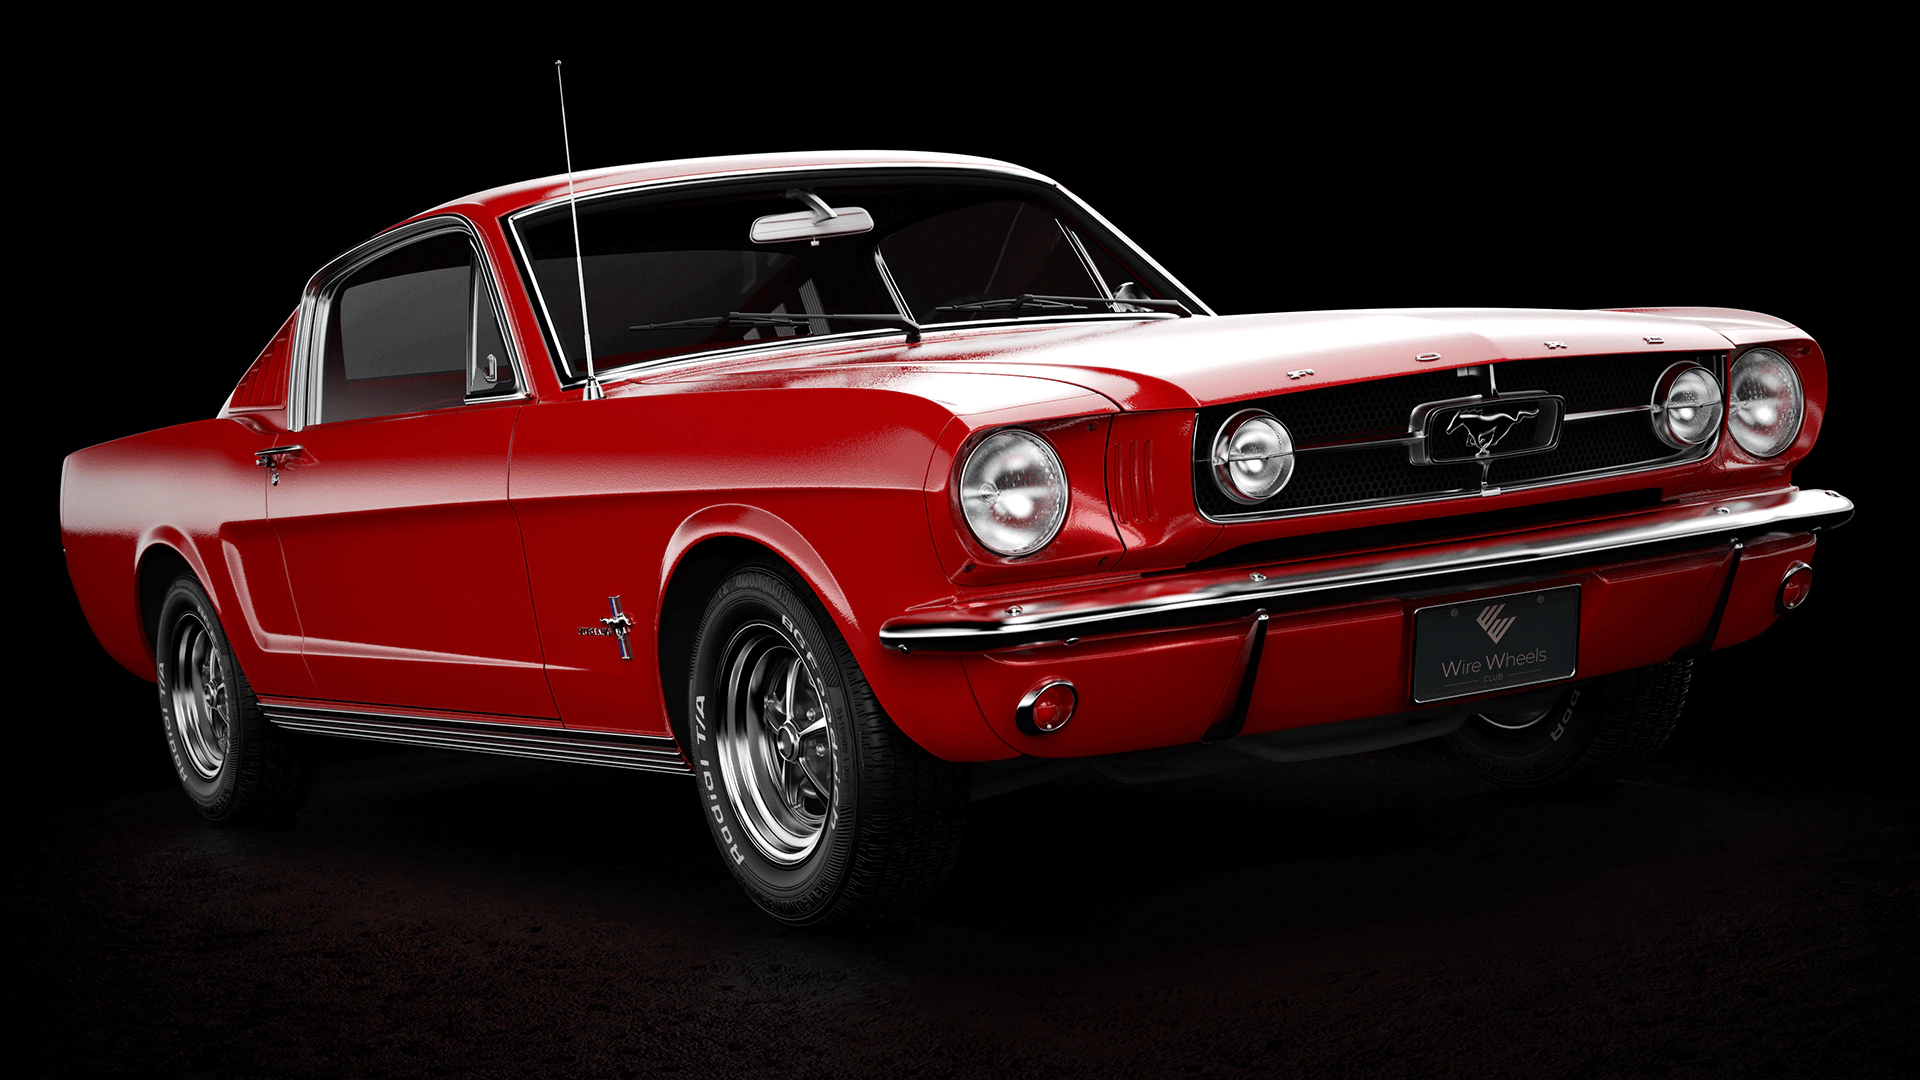 FORD MUSTANG FASTBACK 1965